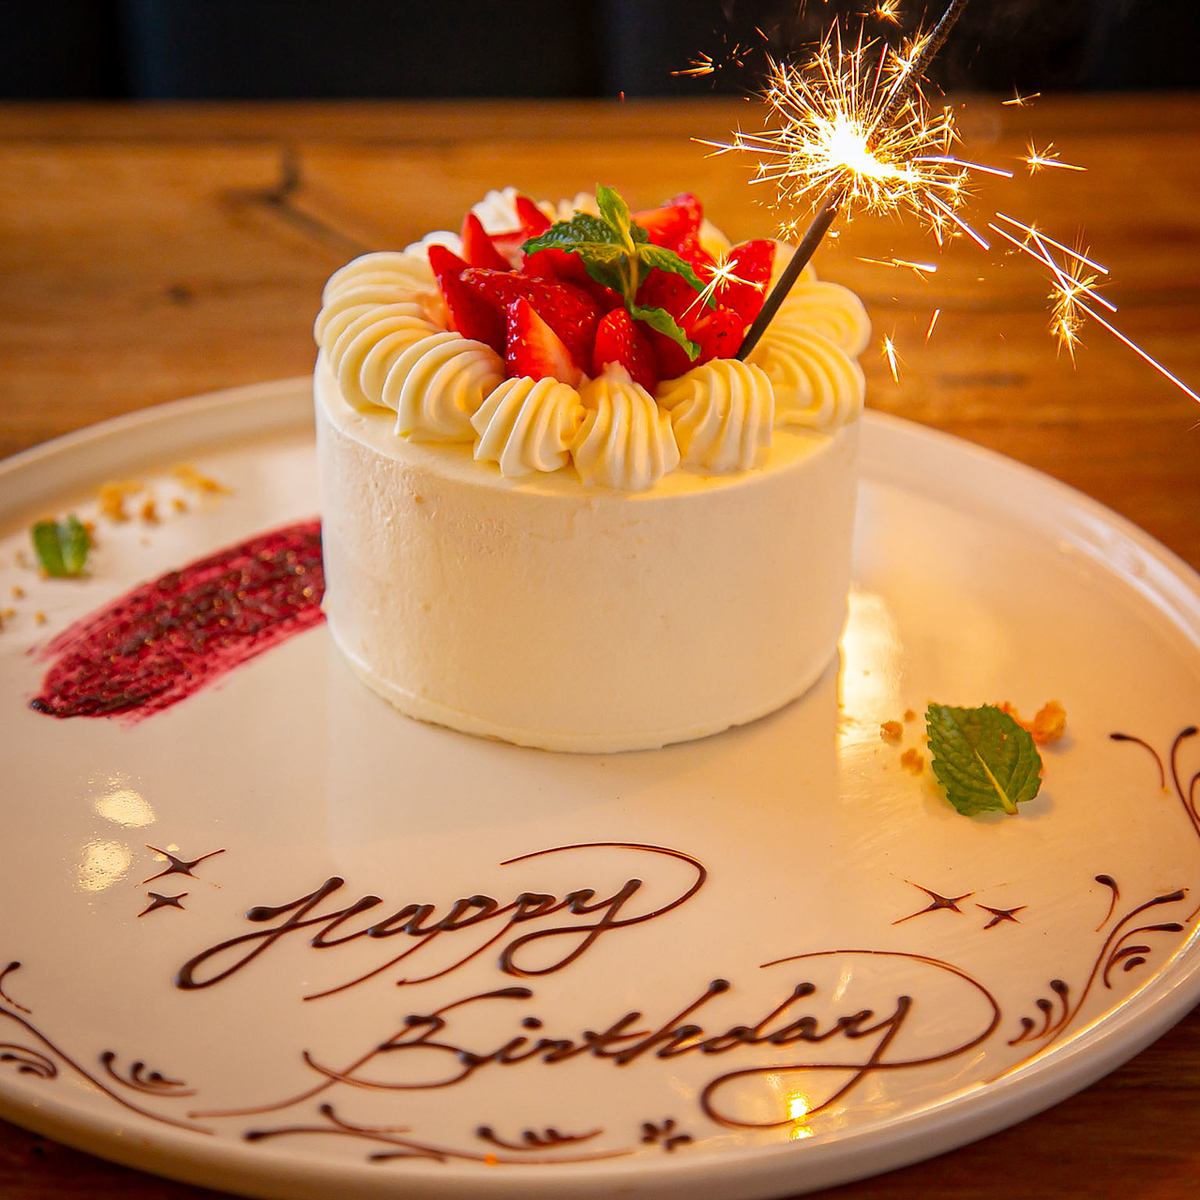 Leave your birthday or anniversary surprise to us!